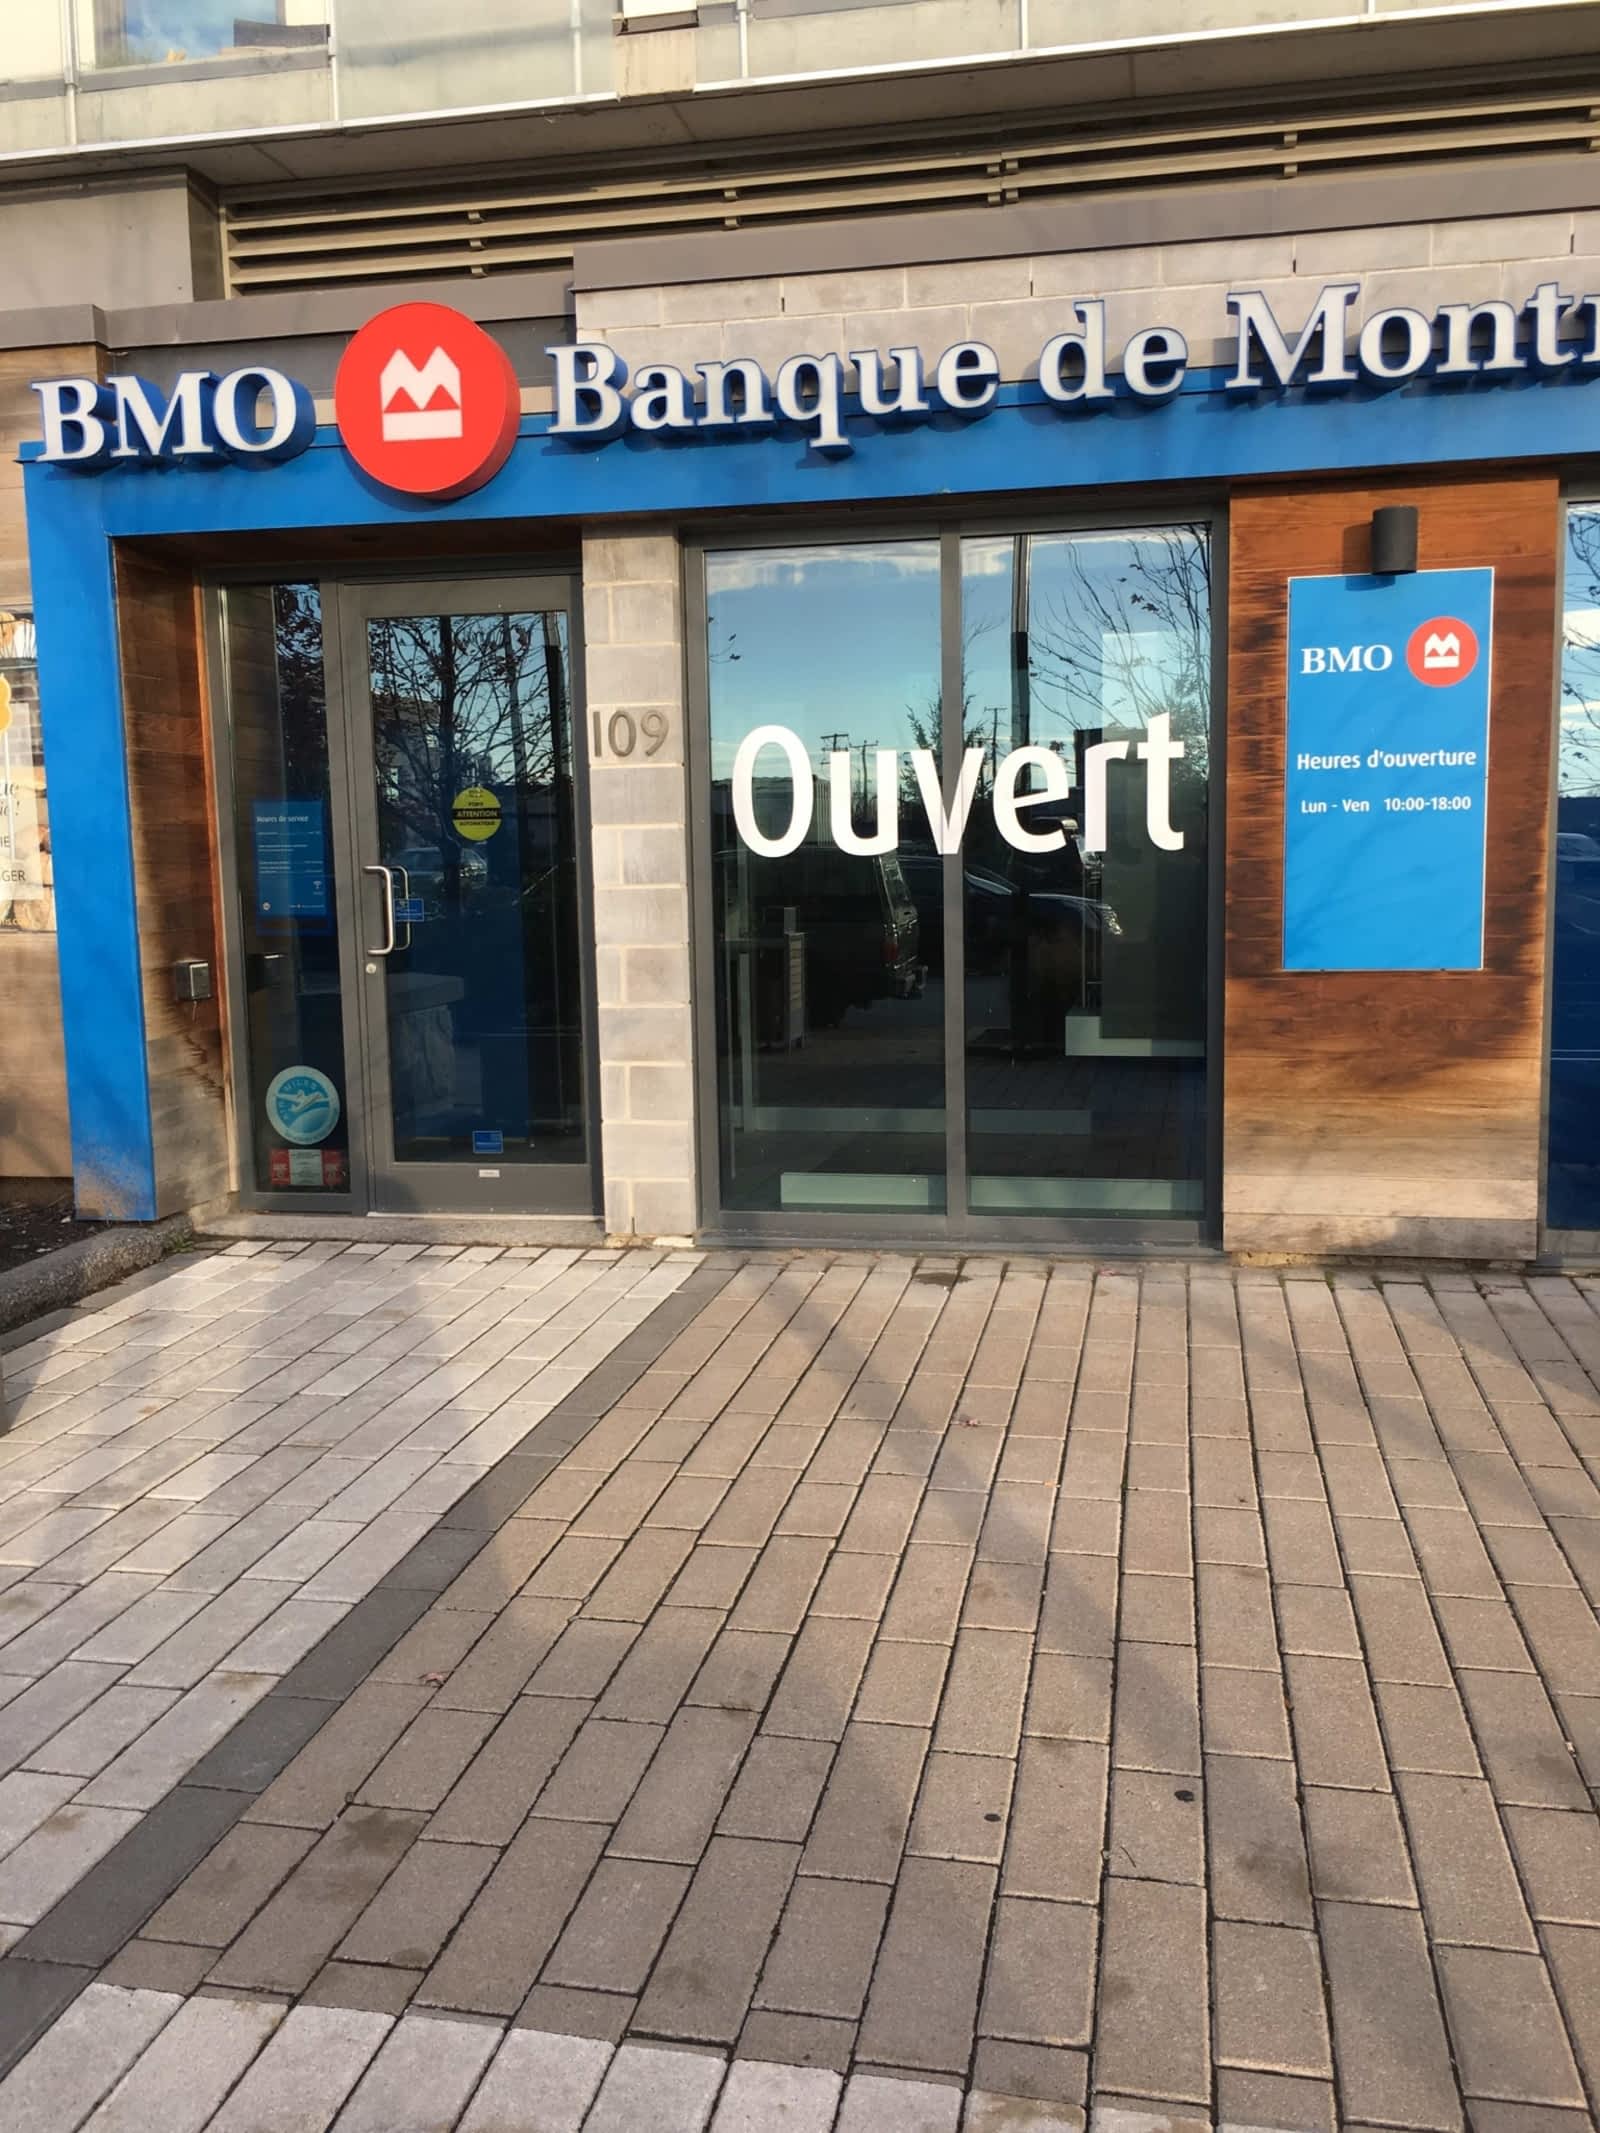 What is the Banque de Montreal?